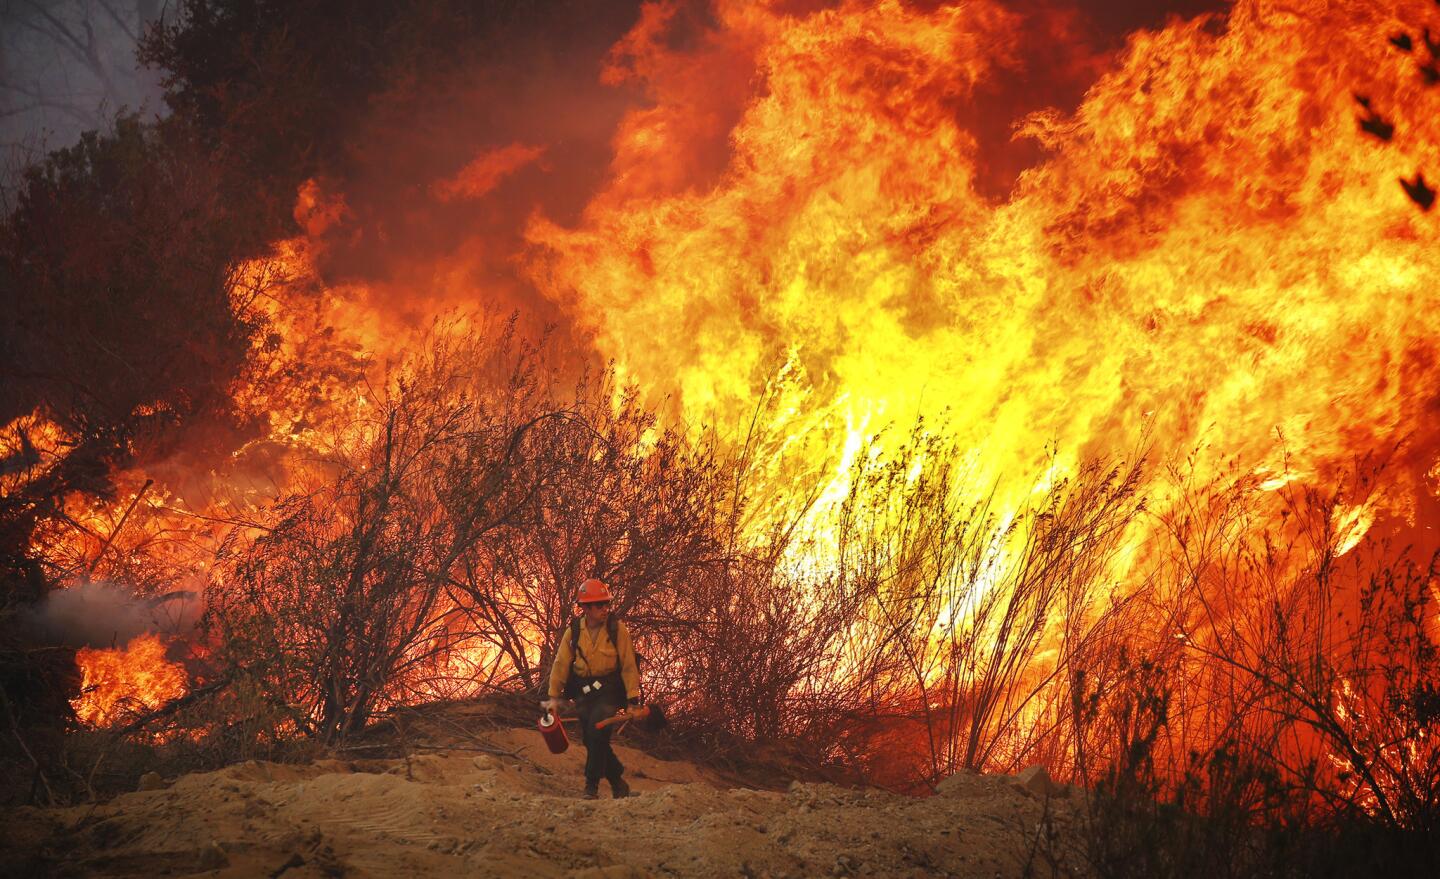 Firefighter Brandon Opliger with the U.S. Forest Service hotshots monitors the Marek Fire as it burns along Little Tujunga Canyon Road above Lake View Terrace.